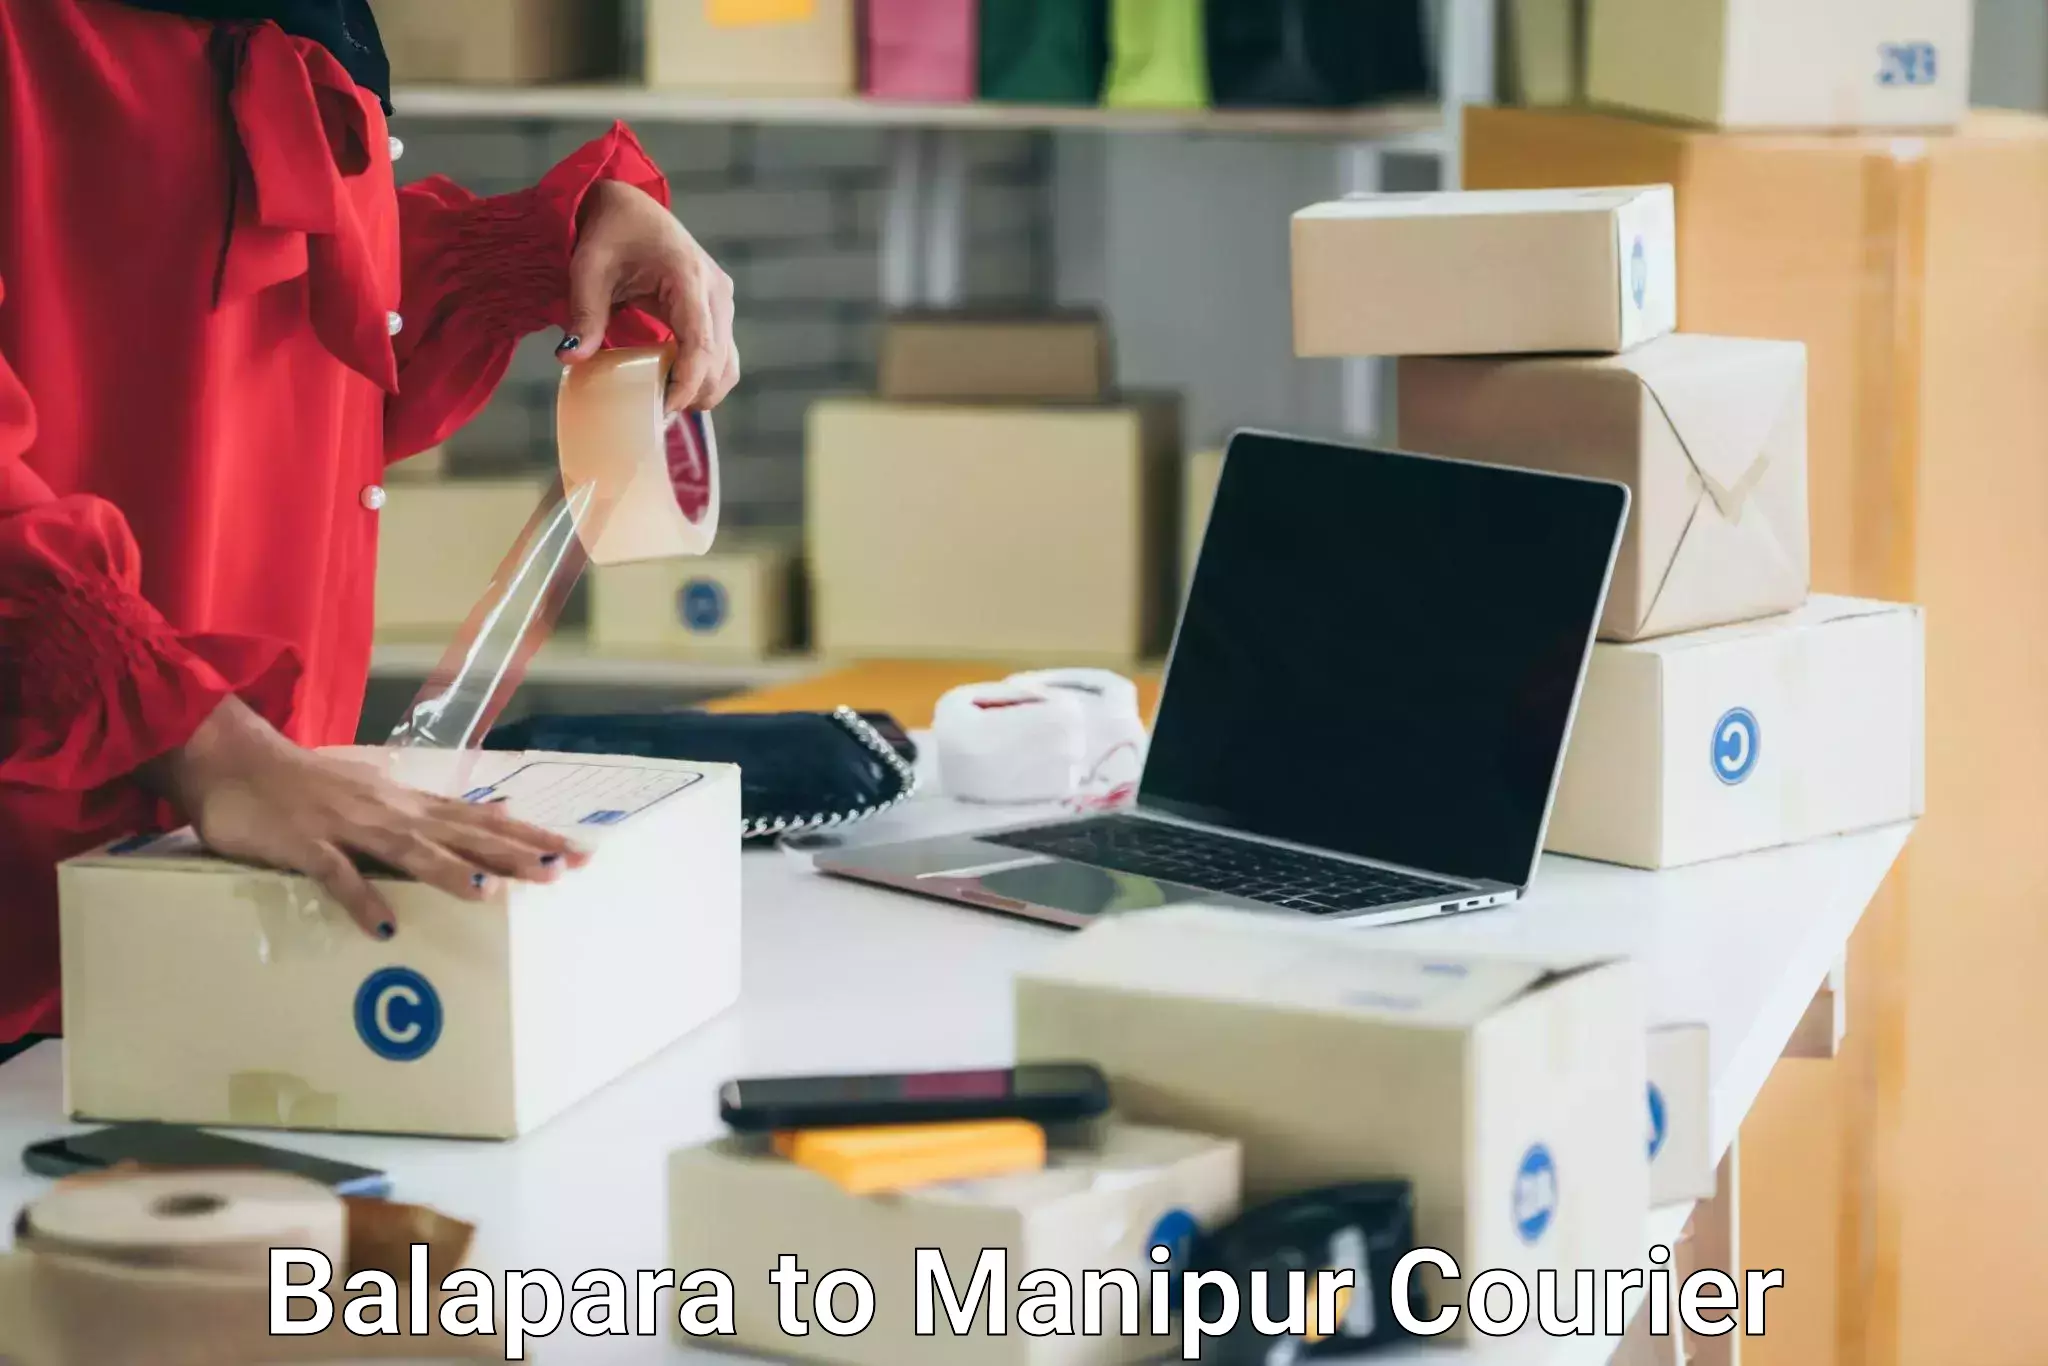 Furniture transport specialists Balapara to Manipur